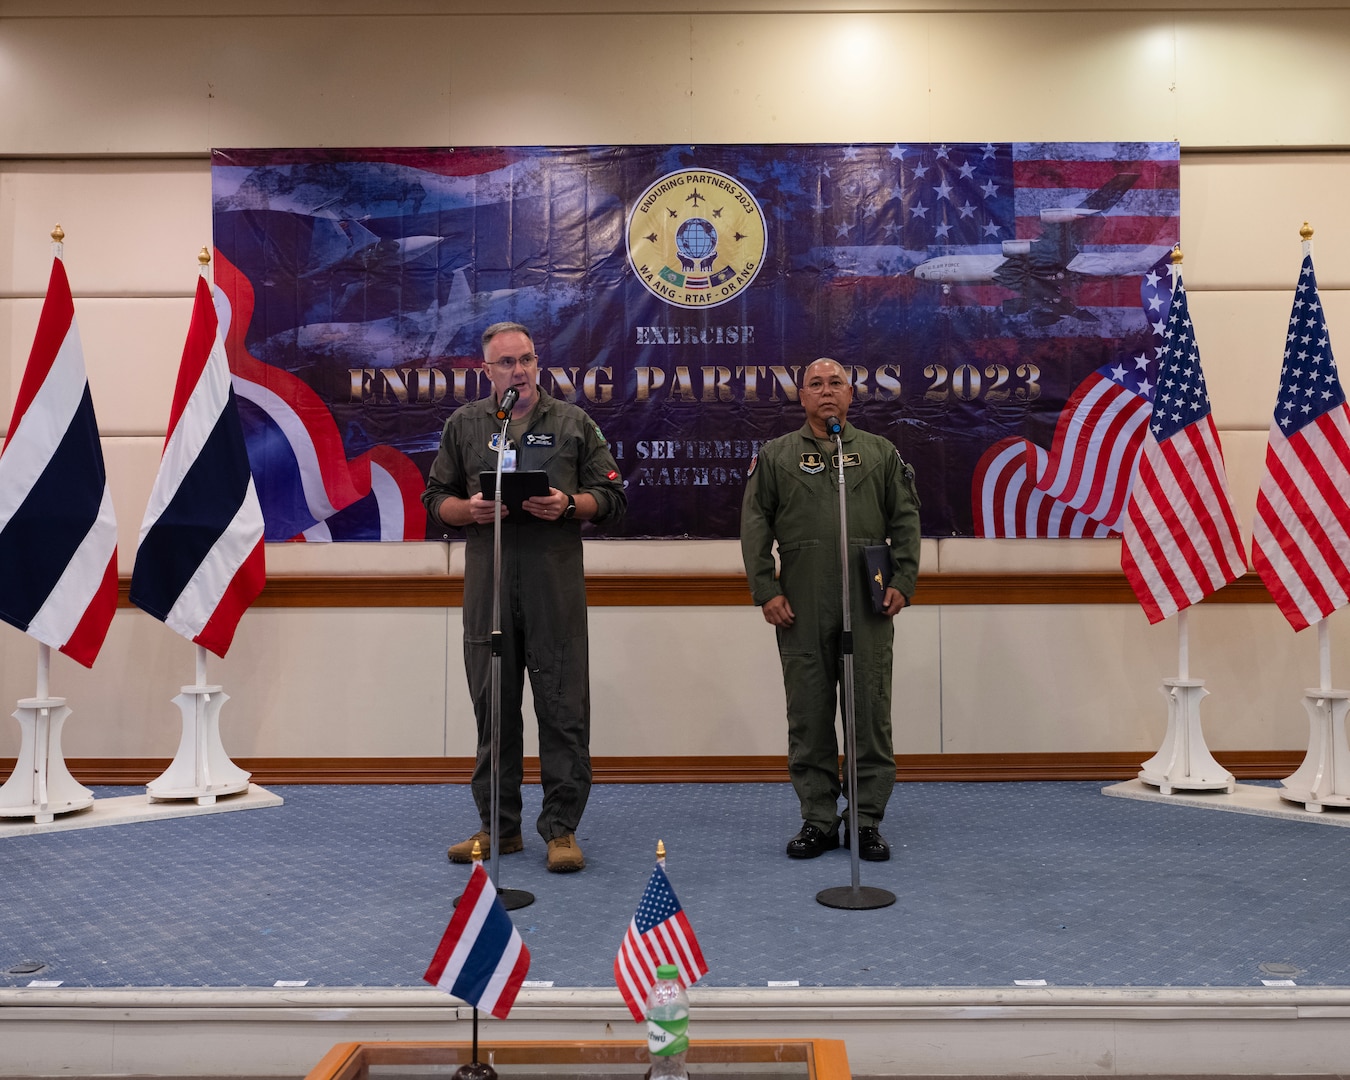 U.S. Air Force Brig. Gen. Gent Welsh, Washington Air National Guard commander, and Royal Thai Air Force Group Captain Nat Kamintra give comments during the opening ceremony of Enduring Partners 2023, Korat Air Base, Kingdom of Thailand, September 11, 2023. The exercise is a joint exercise between the Kingdom of Thailand, the Washington and Oregon Air National Guard. The Washington National Guard has a long-standing State Partnership with the Kingdom of Thailand. (U.S. Air Force photo by Tech. Sgt. Michael L. Brown)